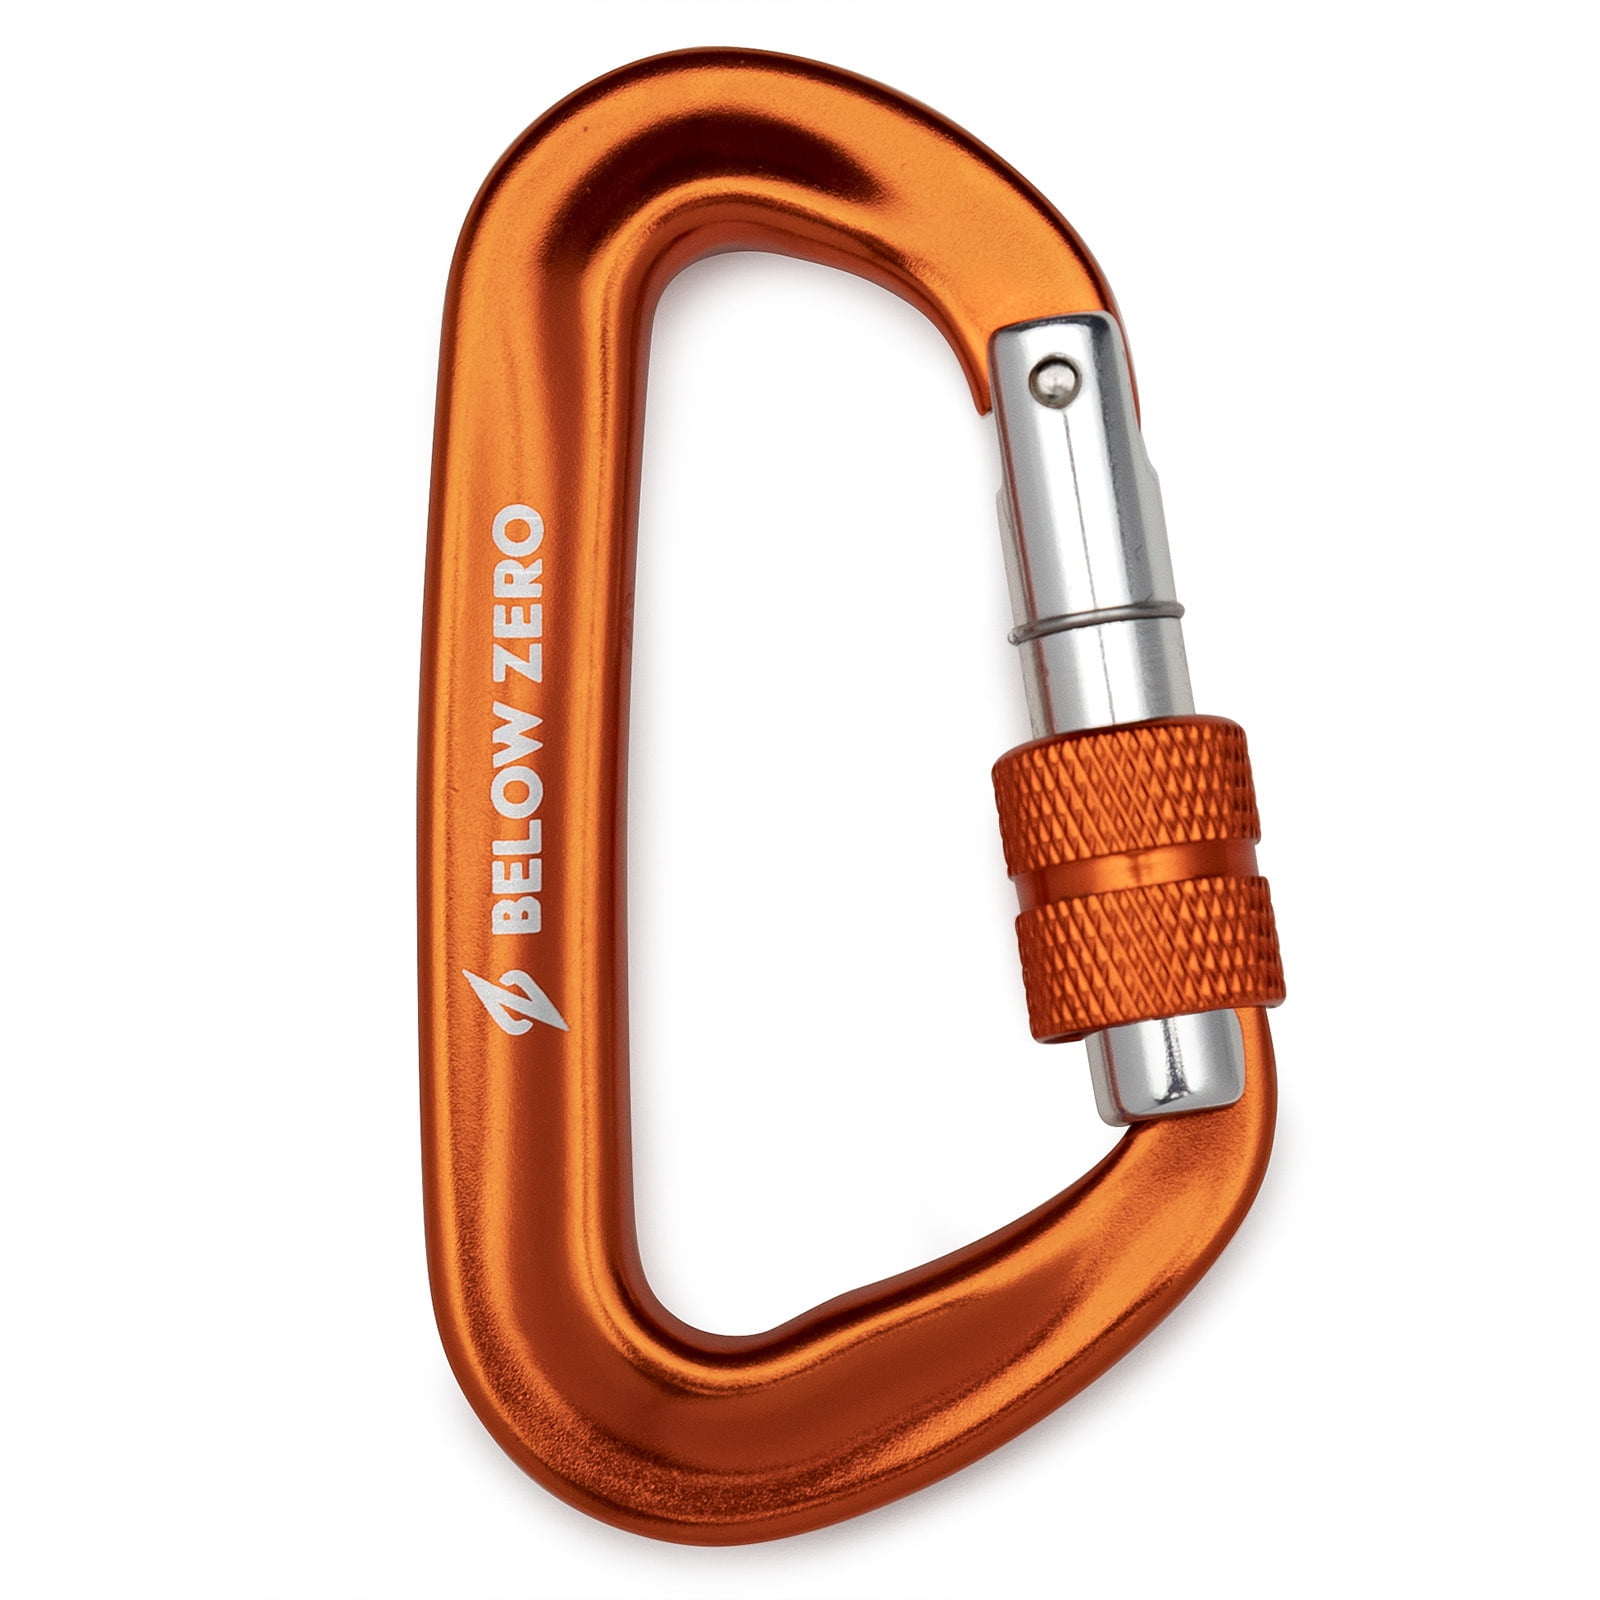 Carabiner clip ~ choose: basic, or screw lock ~ large & small ~ heavy duty!